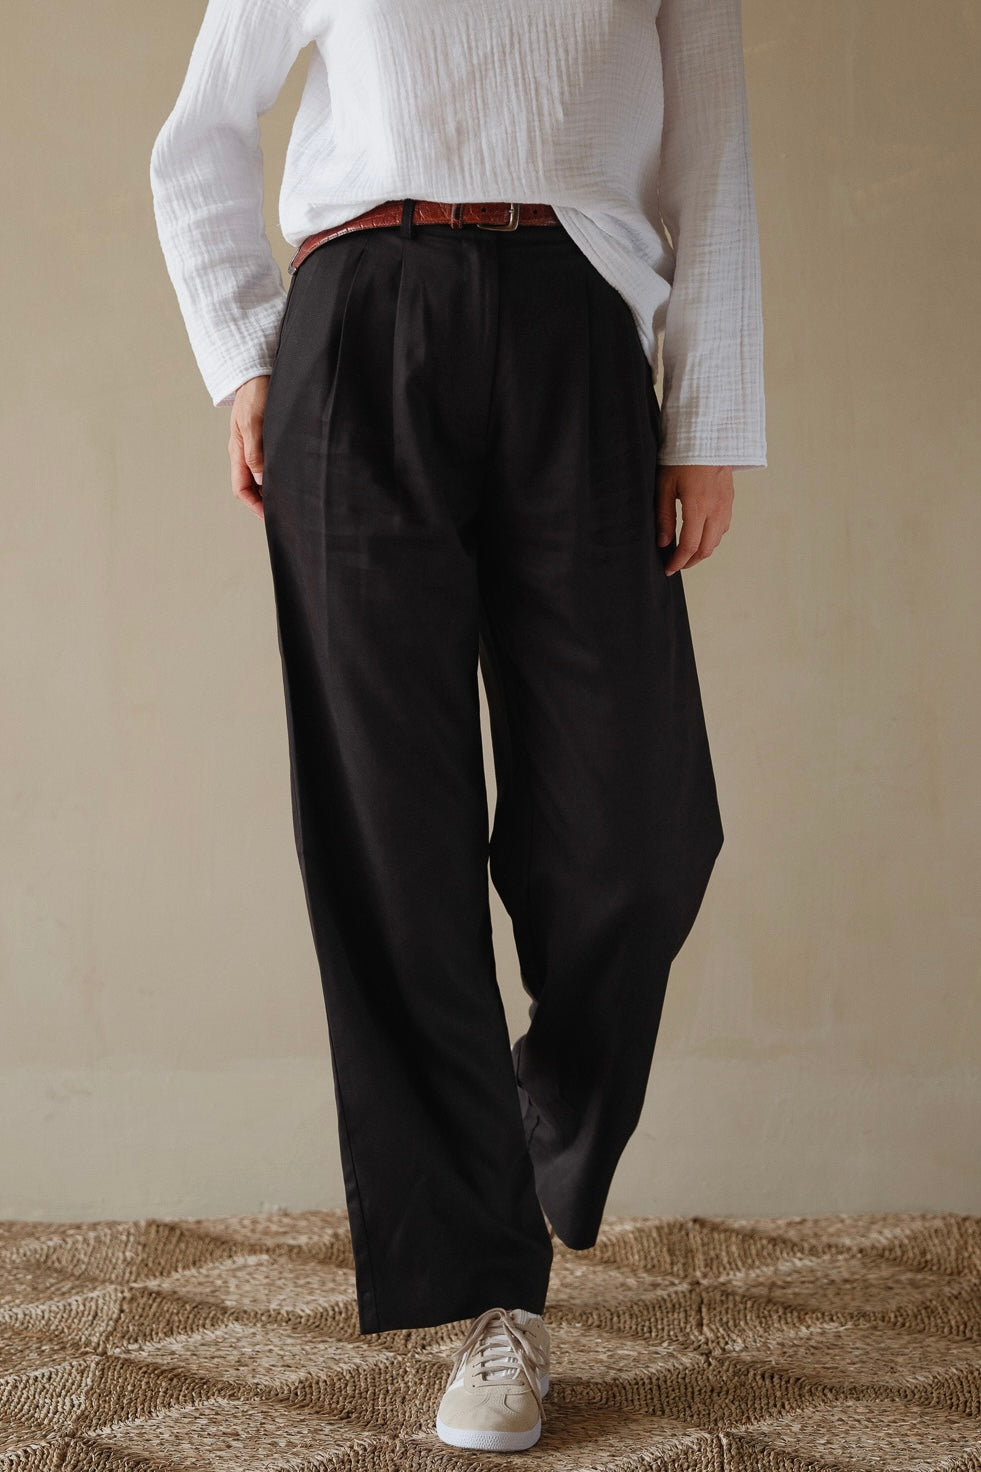 The Pleated Trouser